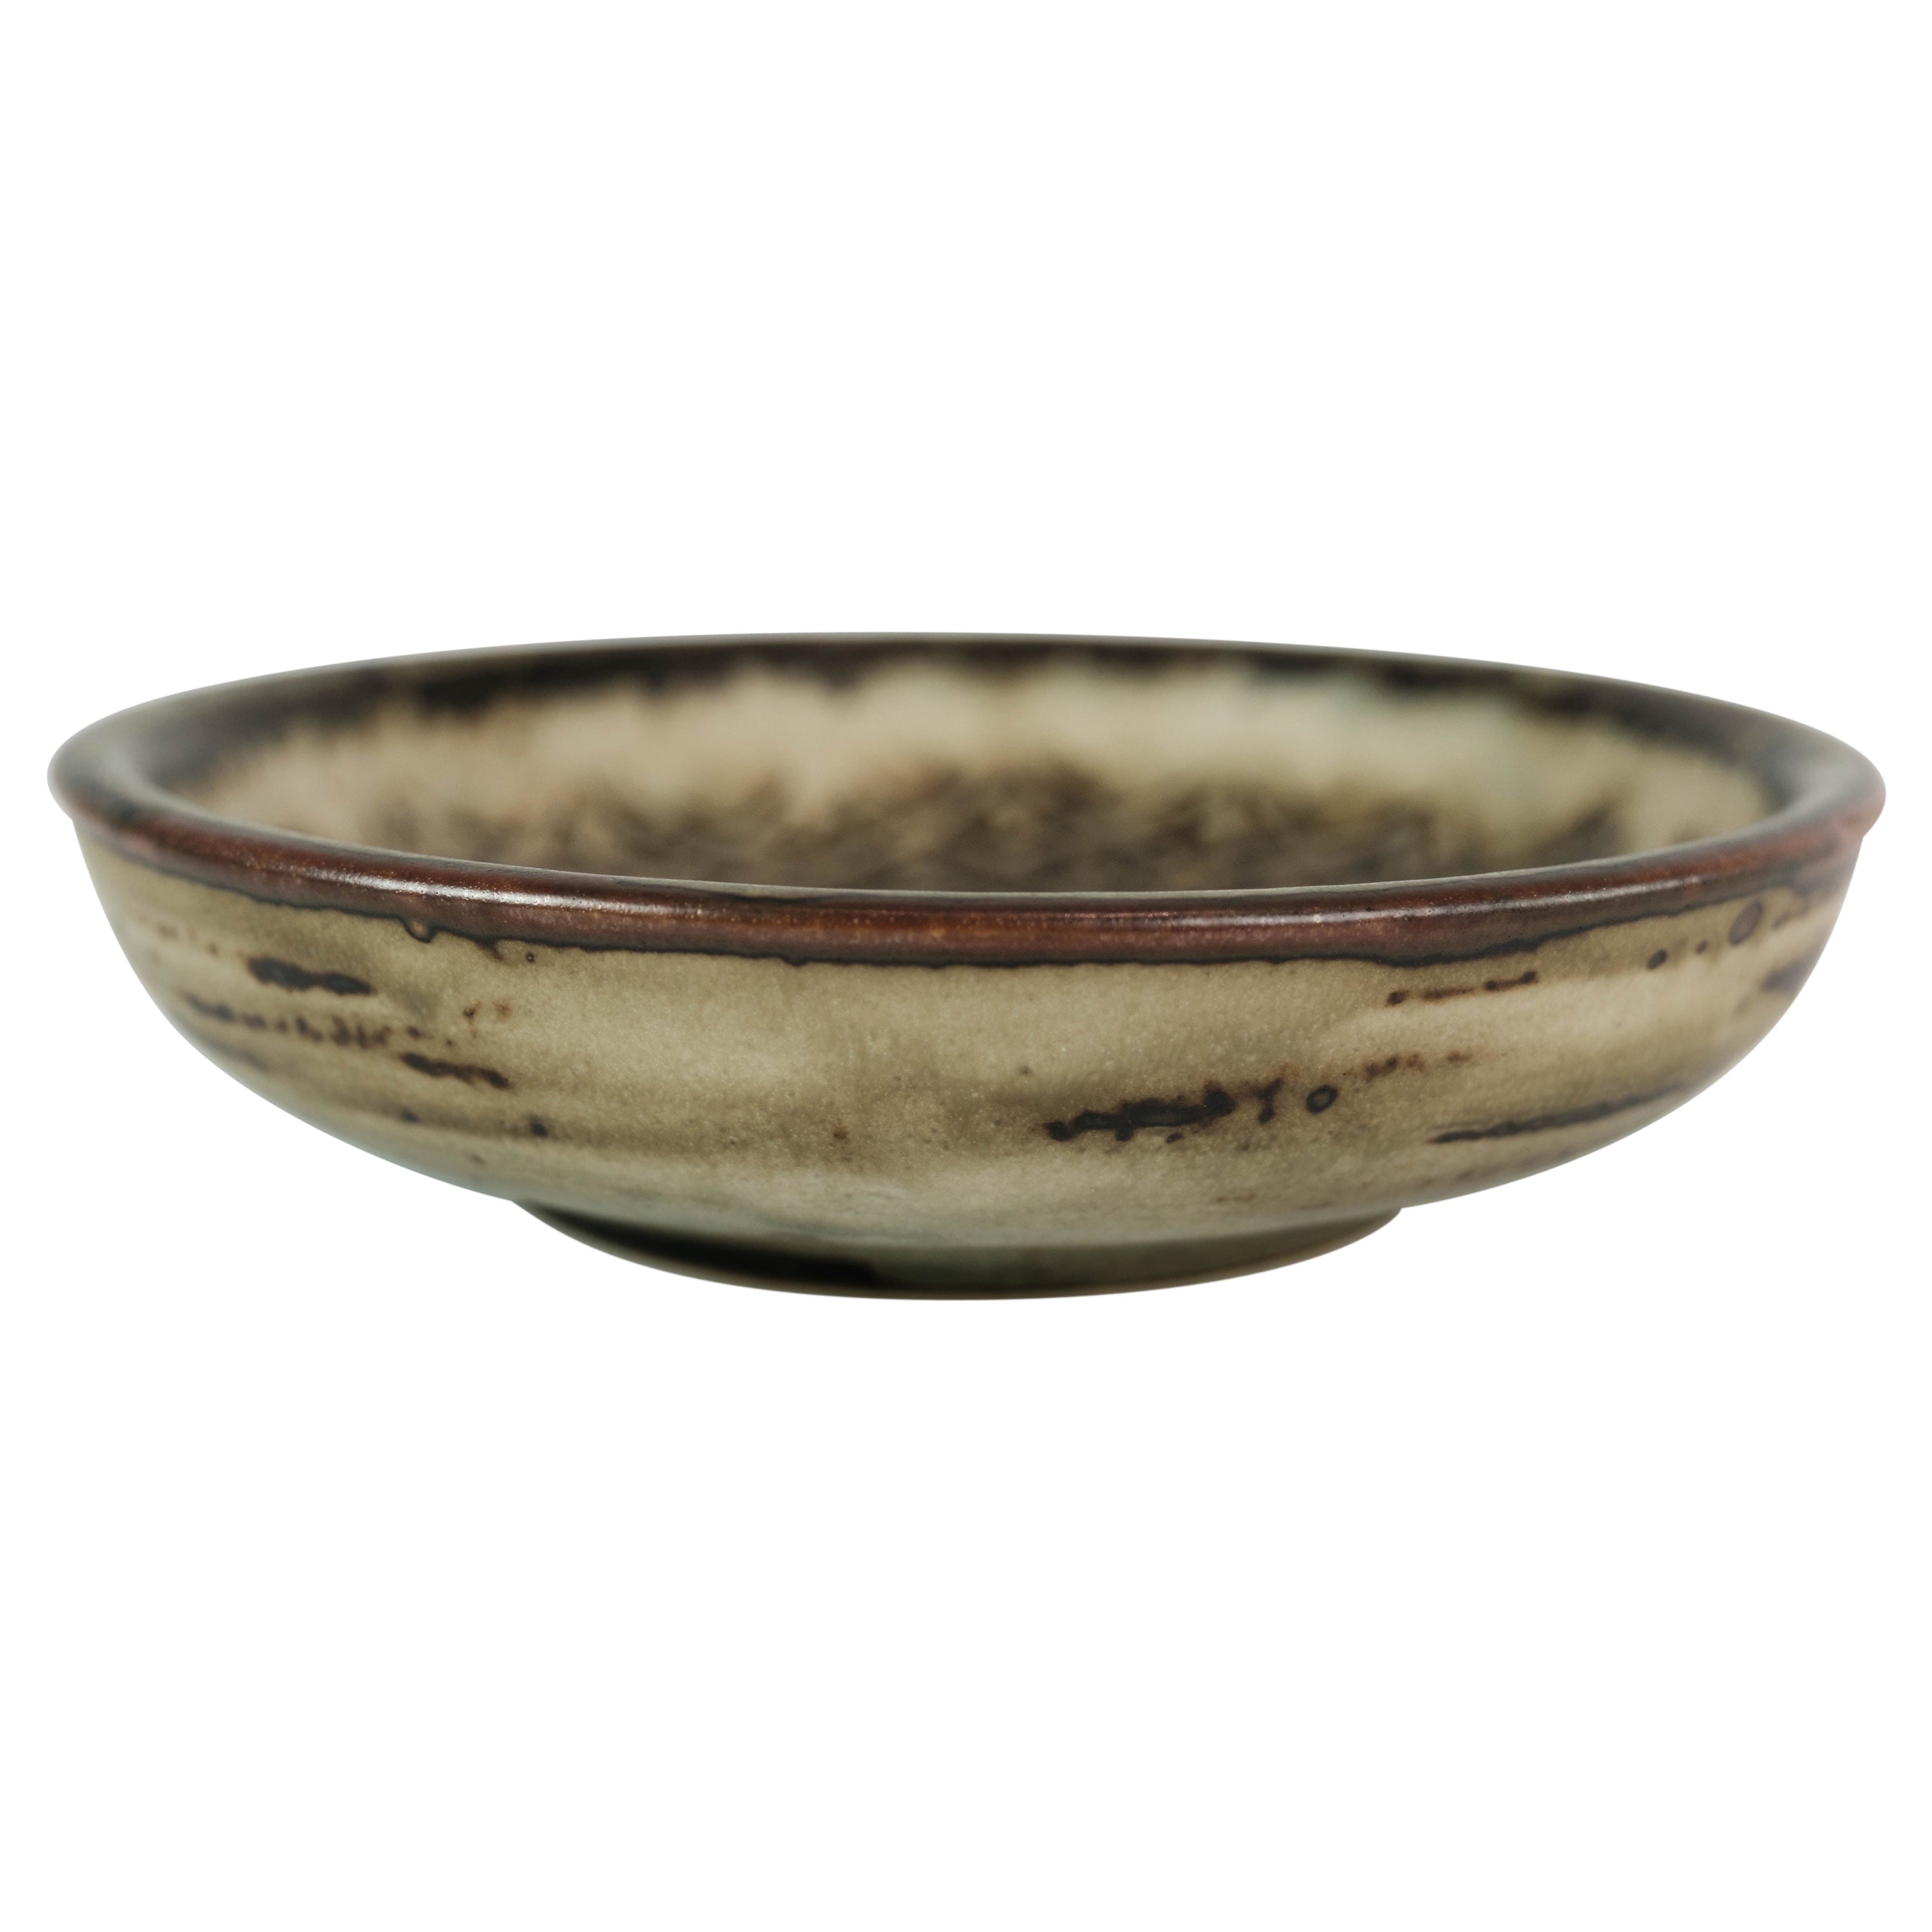 Stoneware Bowl In Brown Colors No. 21567 By Gerd Bøgelund From 1960s For Sale